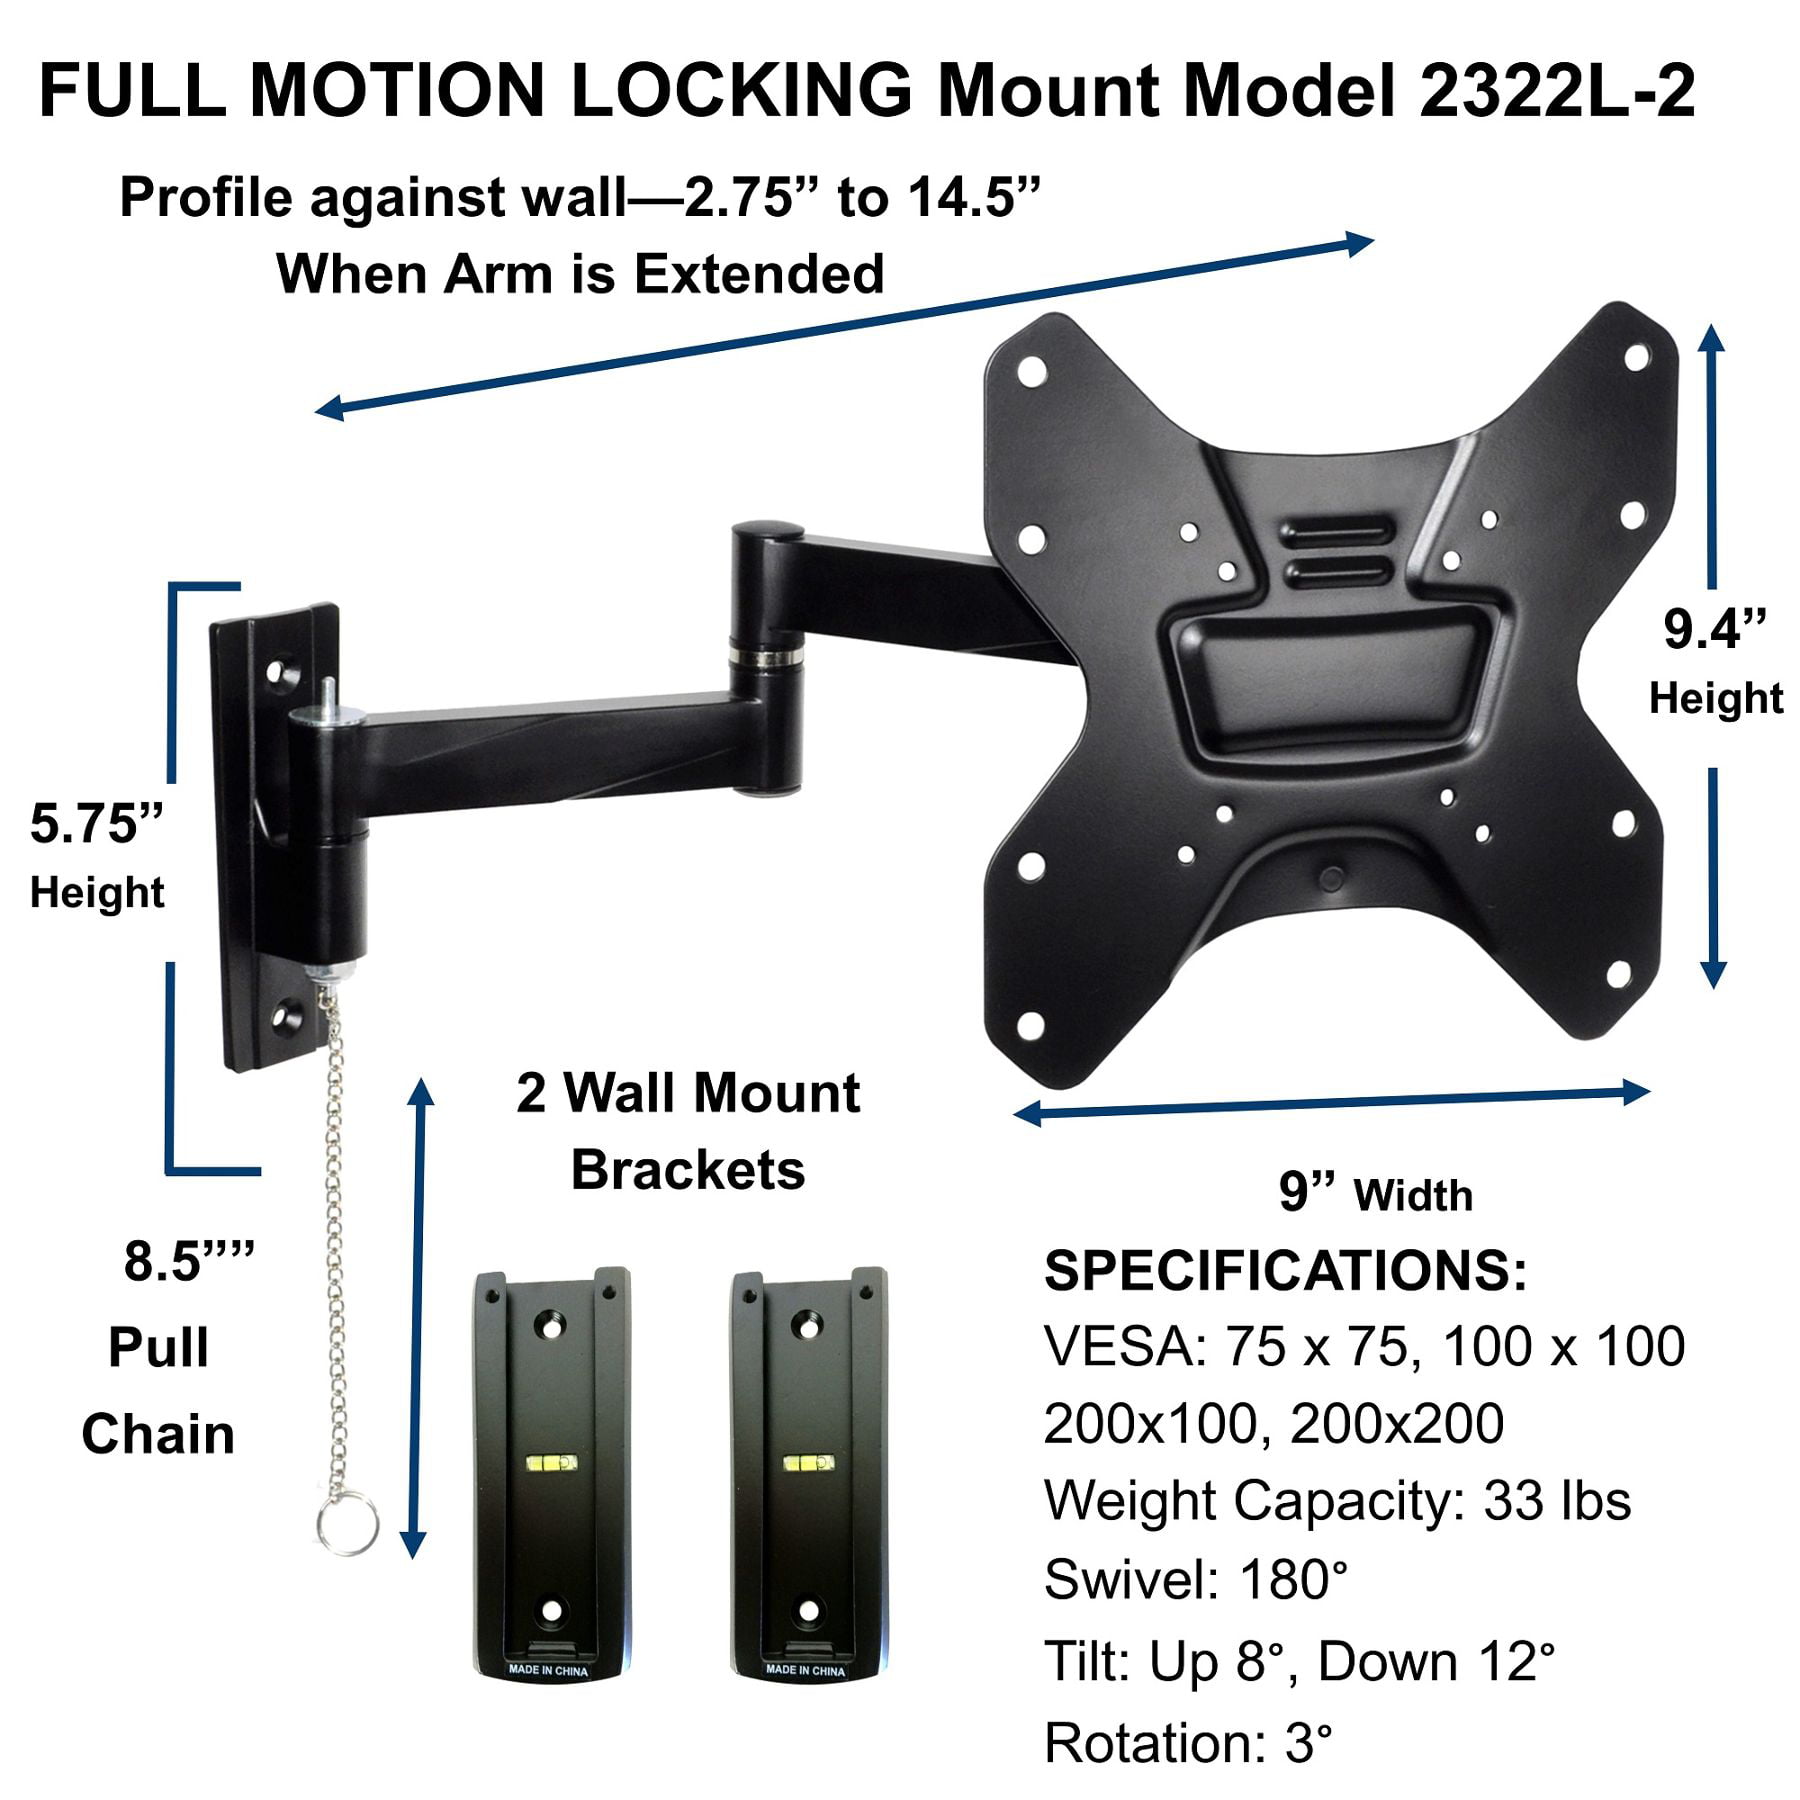 Lockable RV TV Wall Mount Full Motion Anti-Vibration Bracket Articulating Detachable Arm for Most 13-43 inch LED LCD Flat Screen Display 1343LK up to 33lbs Metallic Gray by WALI 